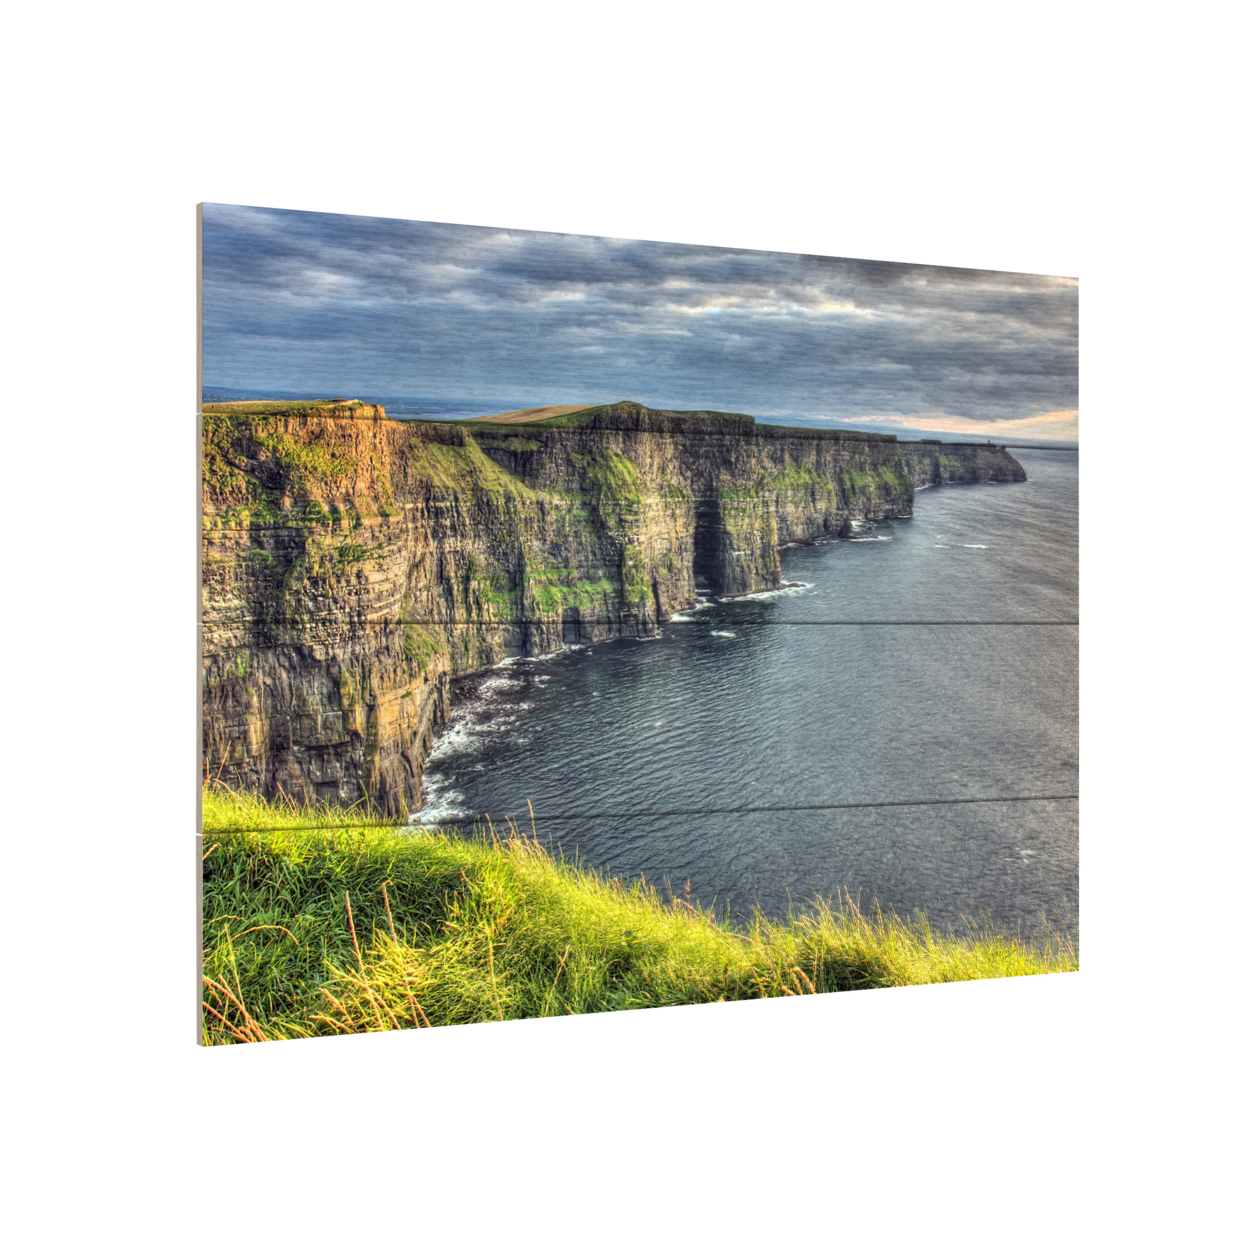 Wall Art 12 X 16 Inches Titled Cliffs Of Moher Ireland Ready To Hang Printed On Wooden Planks